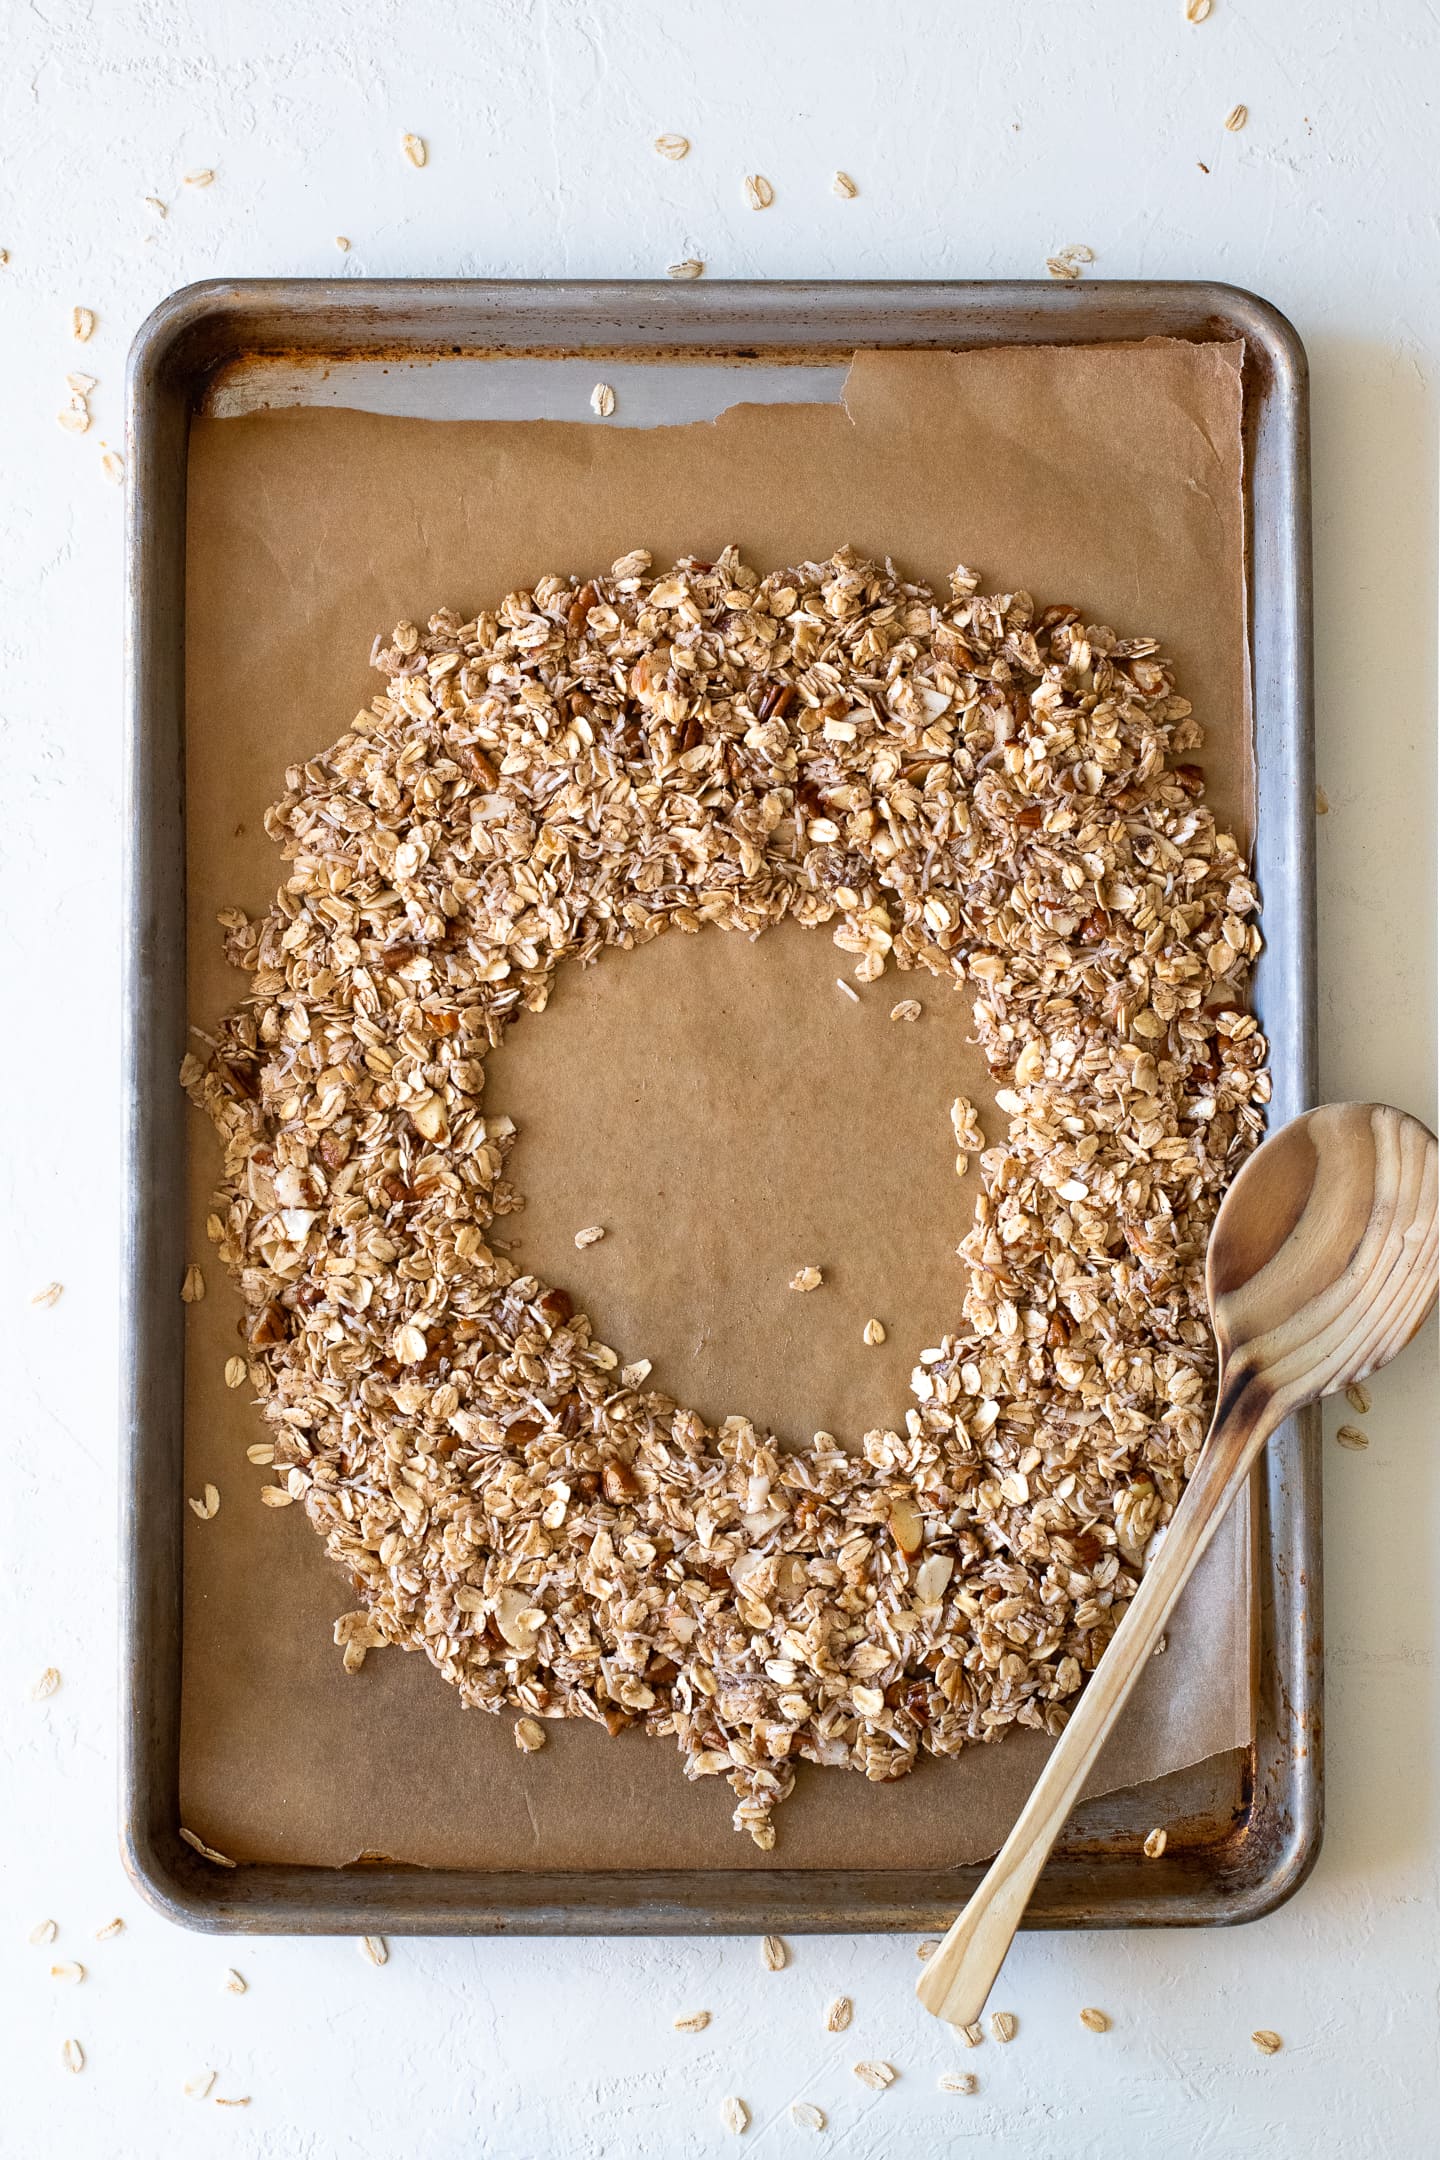 Overhead view of unbaked granola arranged in a circular shape on a sheet on a baking sheet, with a wooden spoon laying across the top.